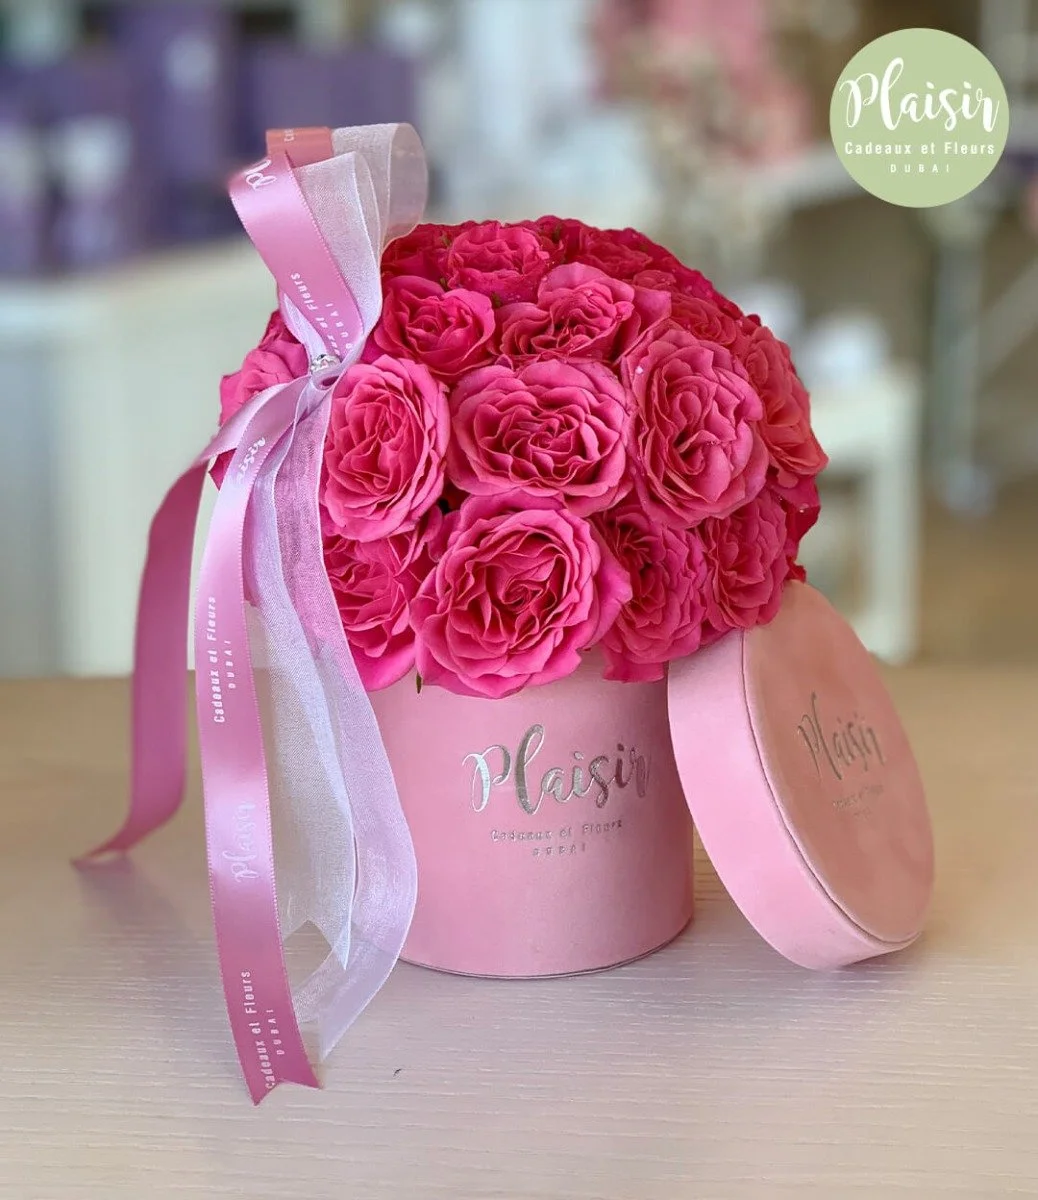 Petite Pink Rose Dome By Plaisir